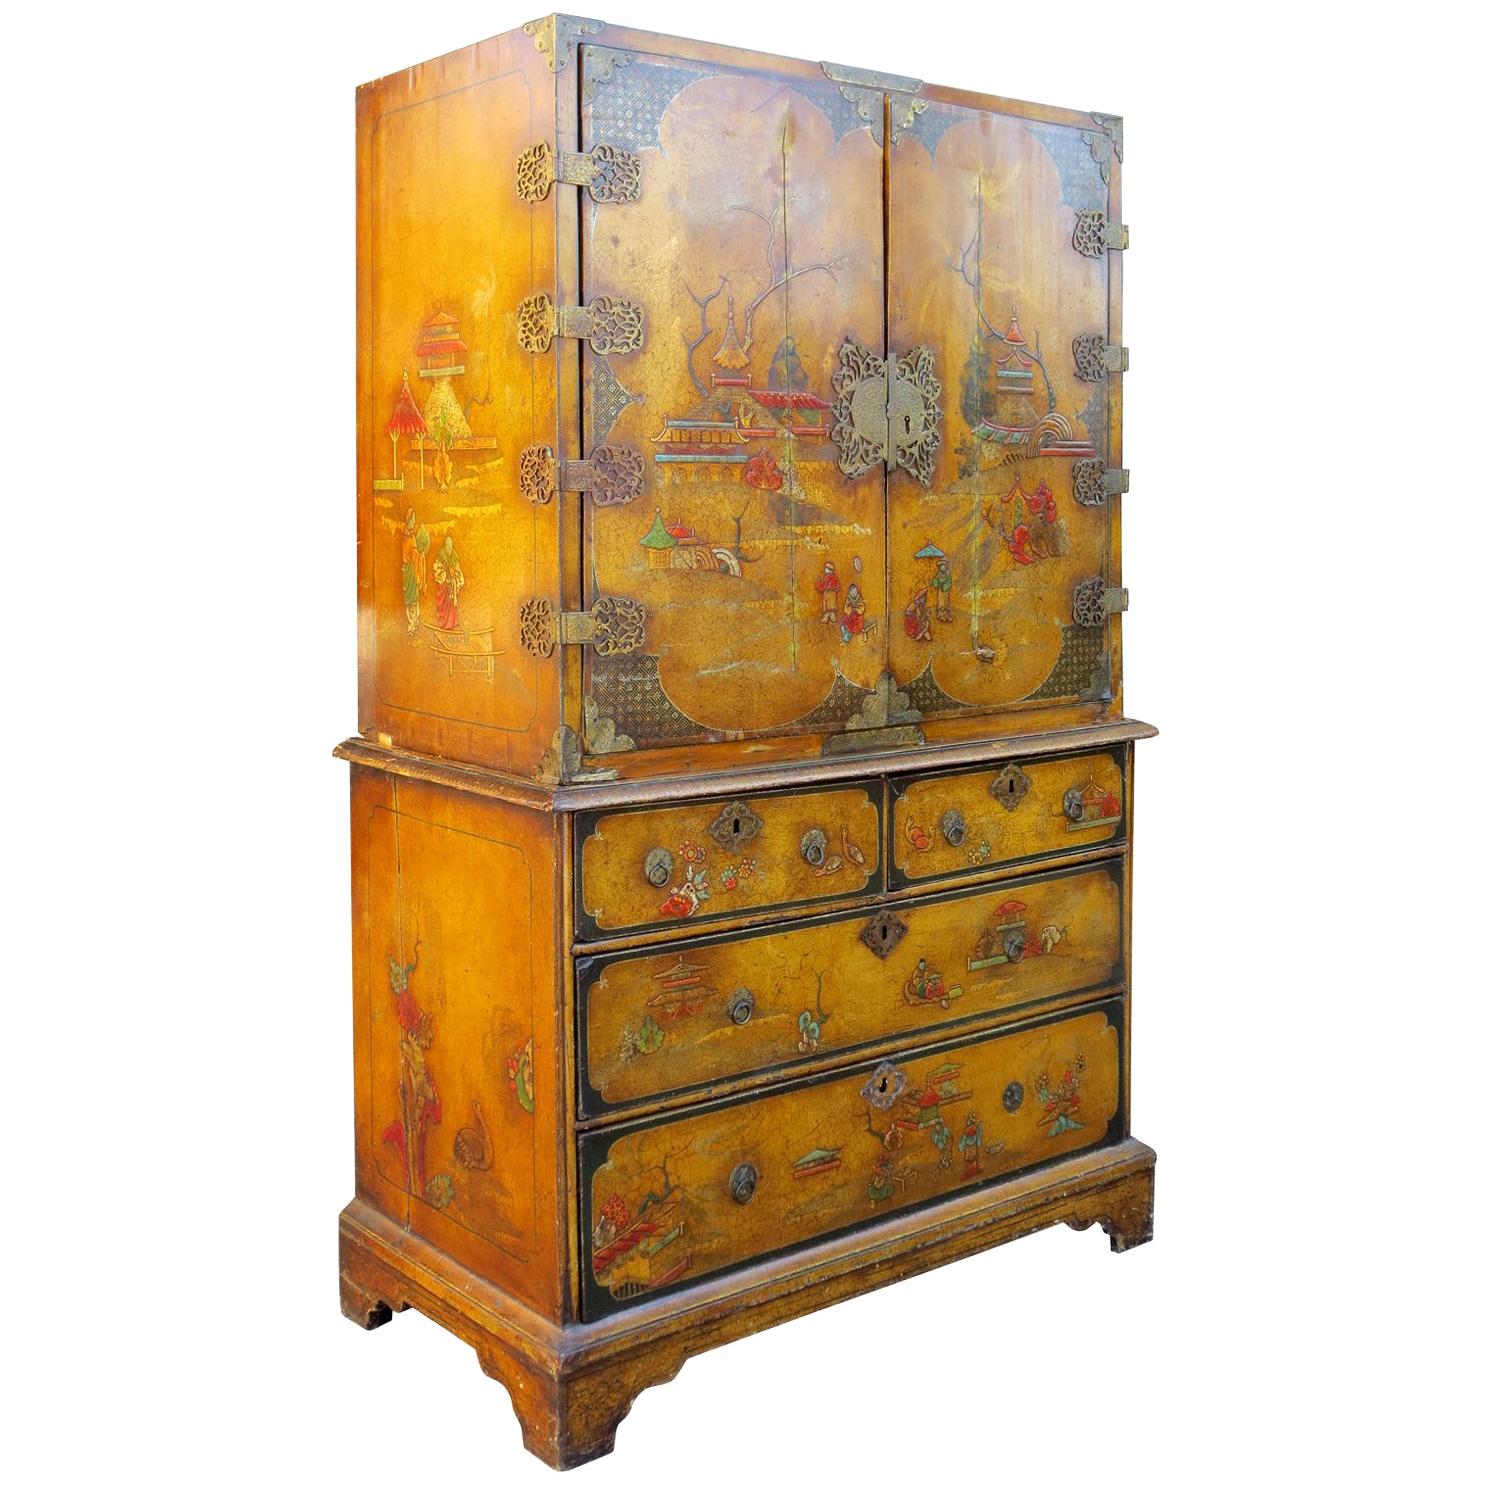 18th-19th Century Chinoiserie Cabinet